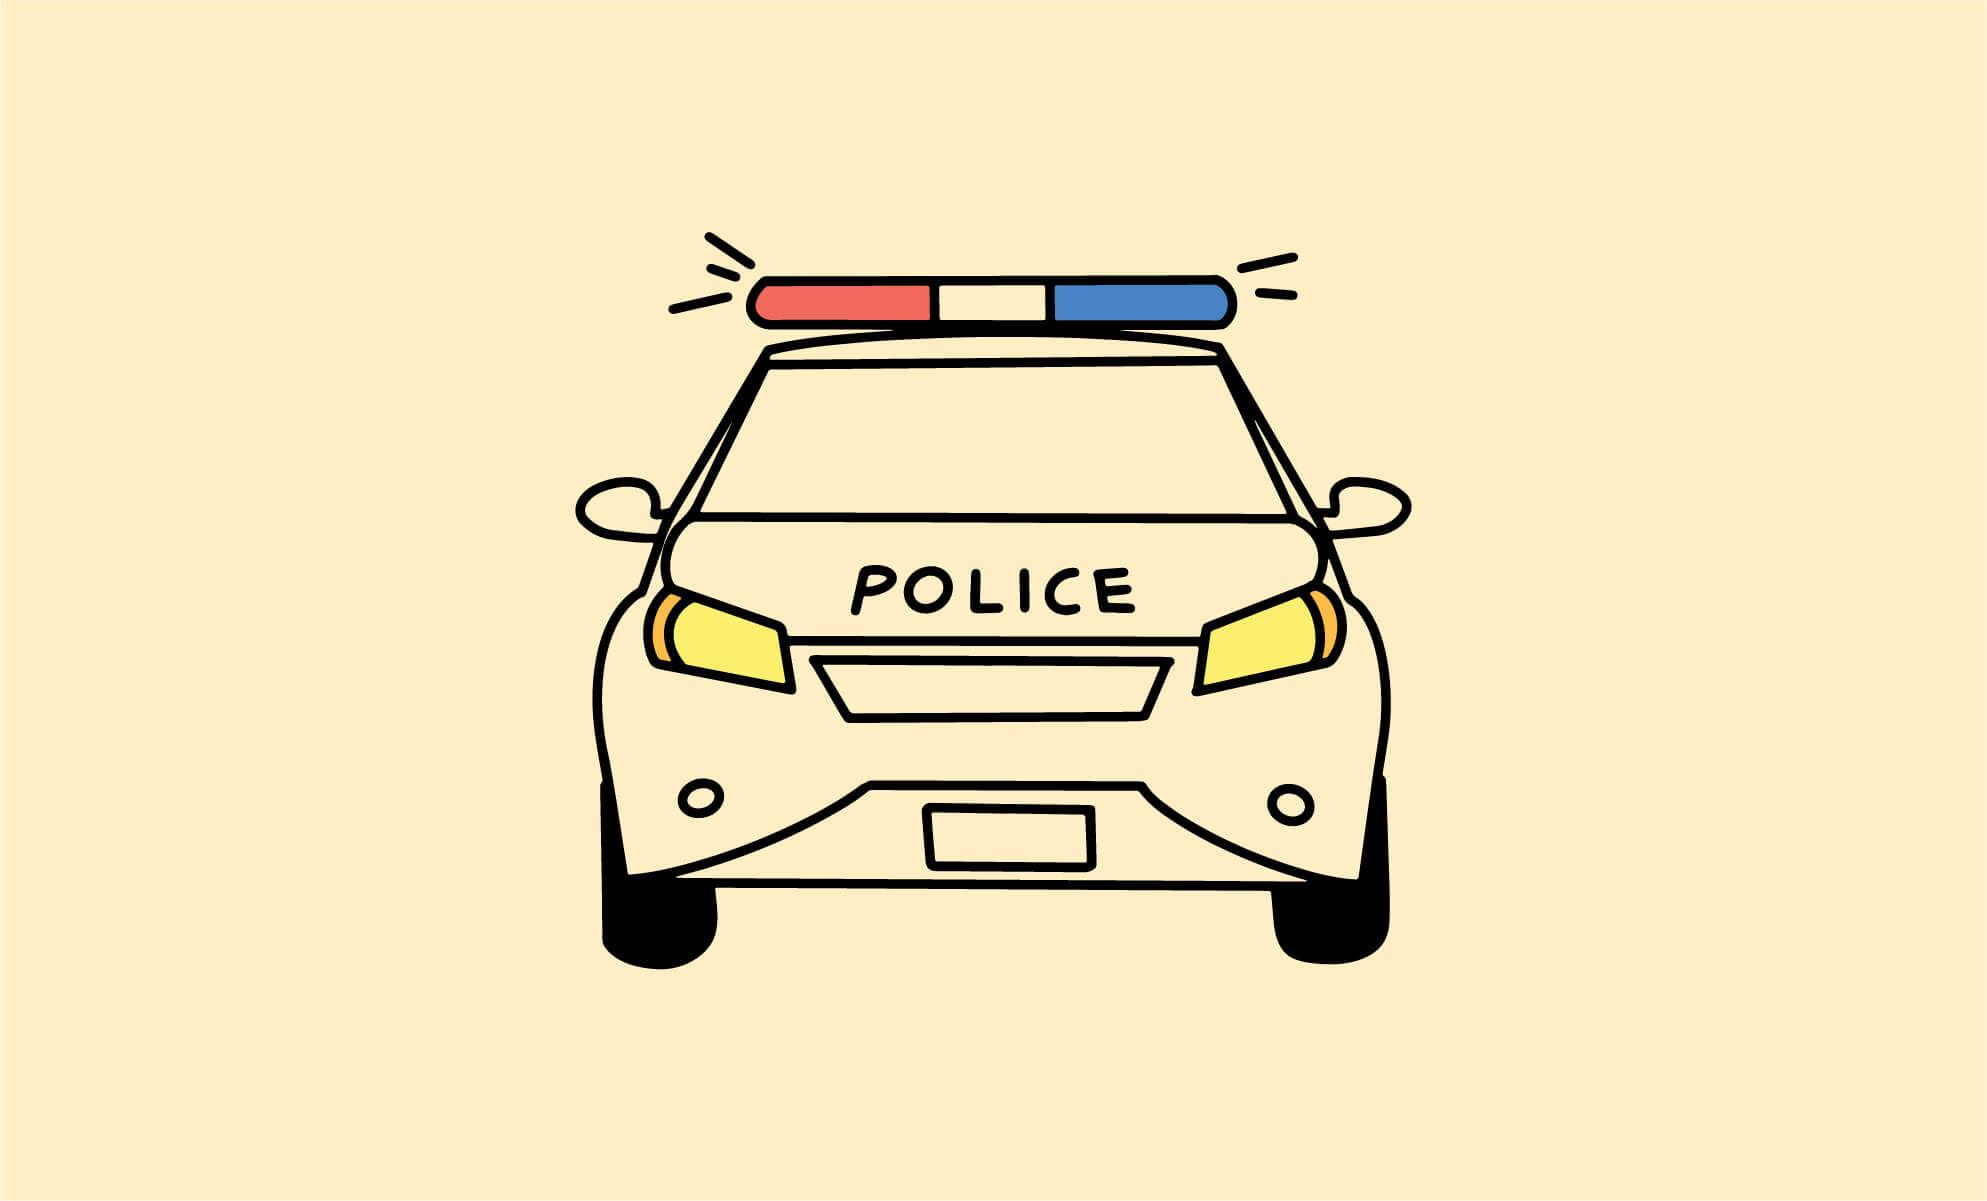 Illustration of a police car on a light beige background. (Whitney Matterfiis for BrainStorm, Inc., 10-25-2021)